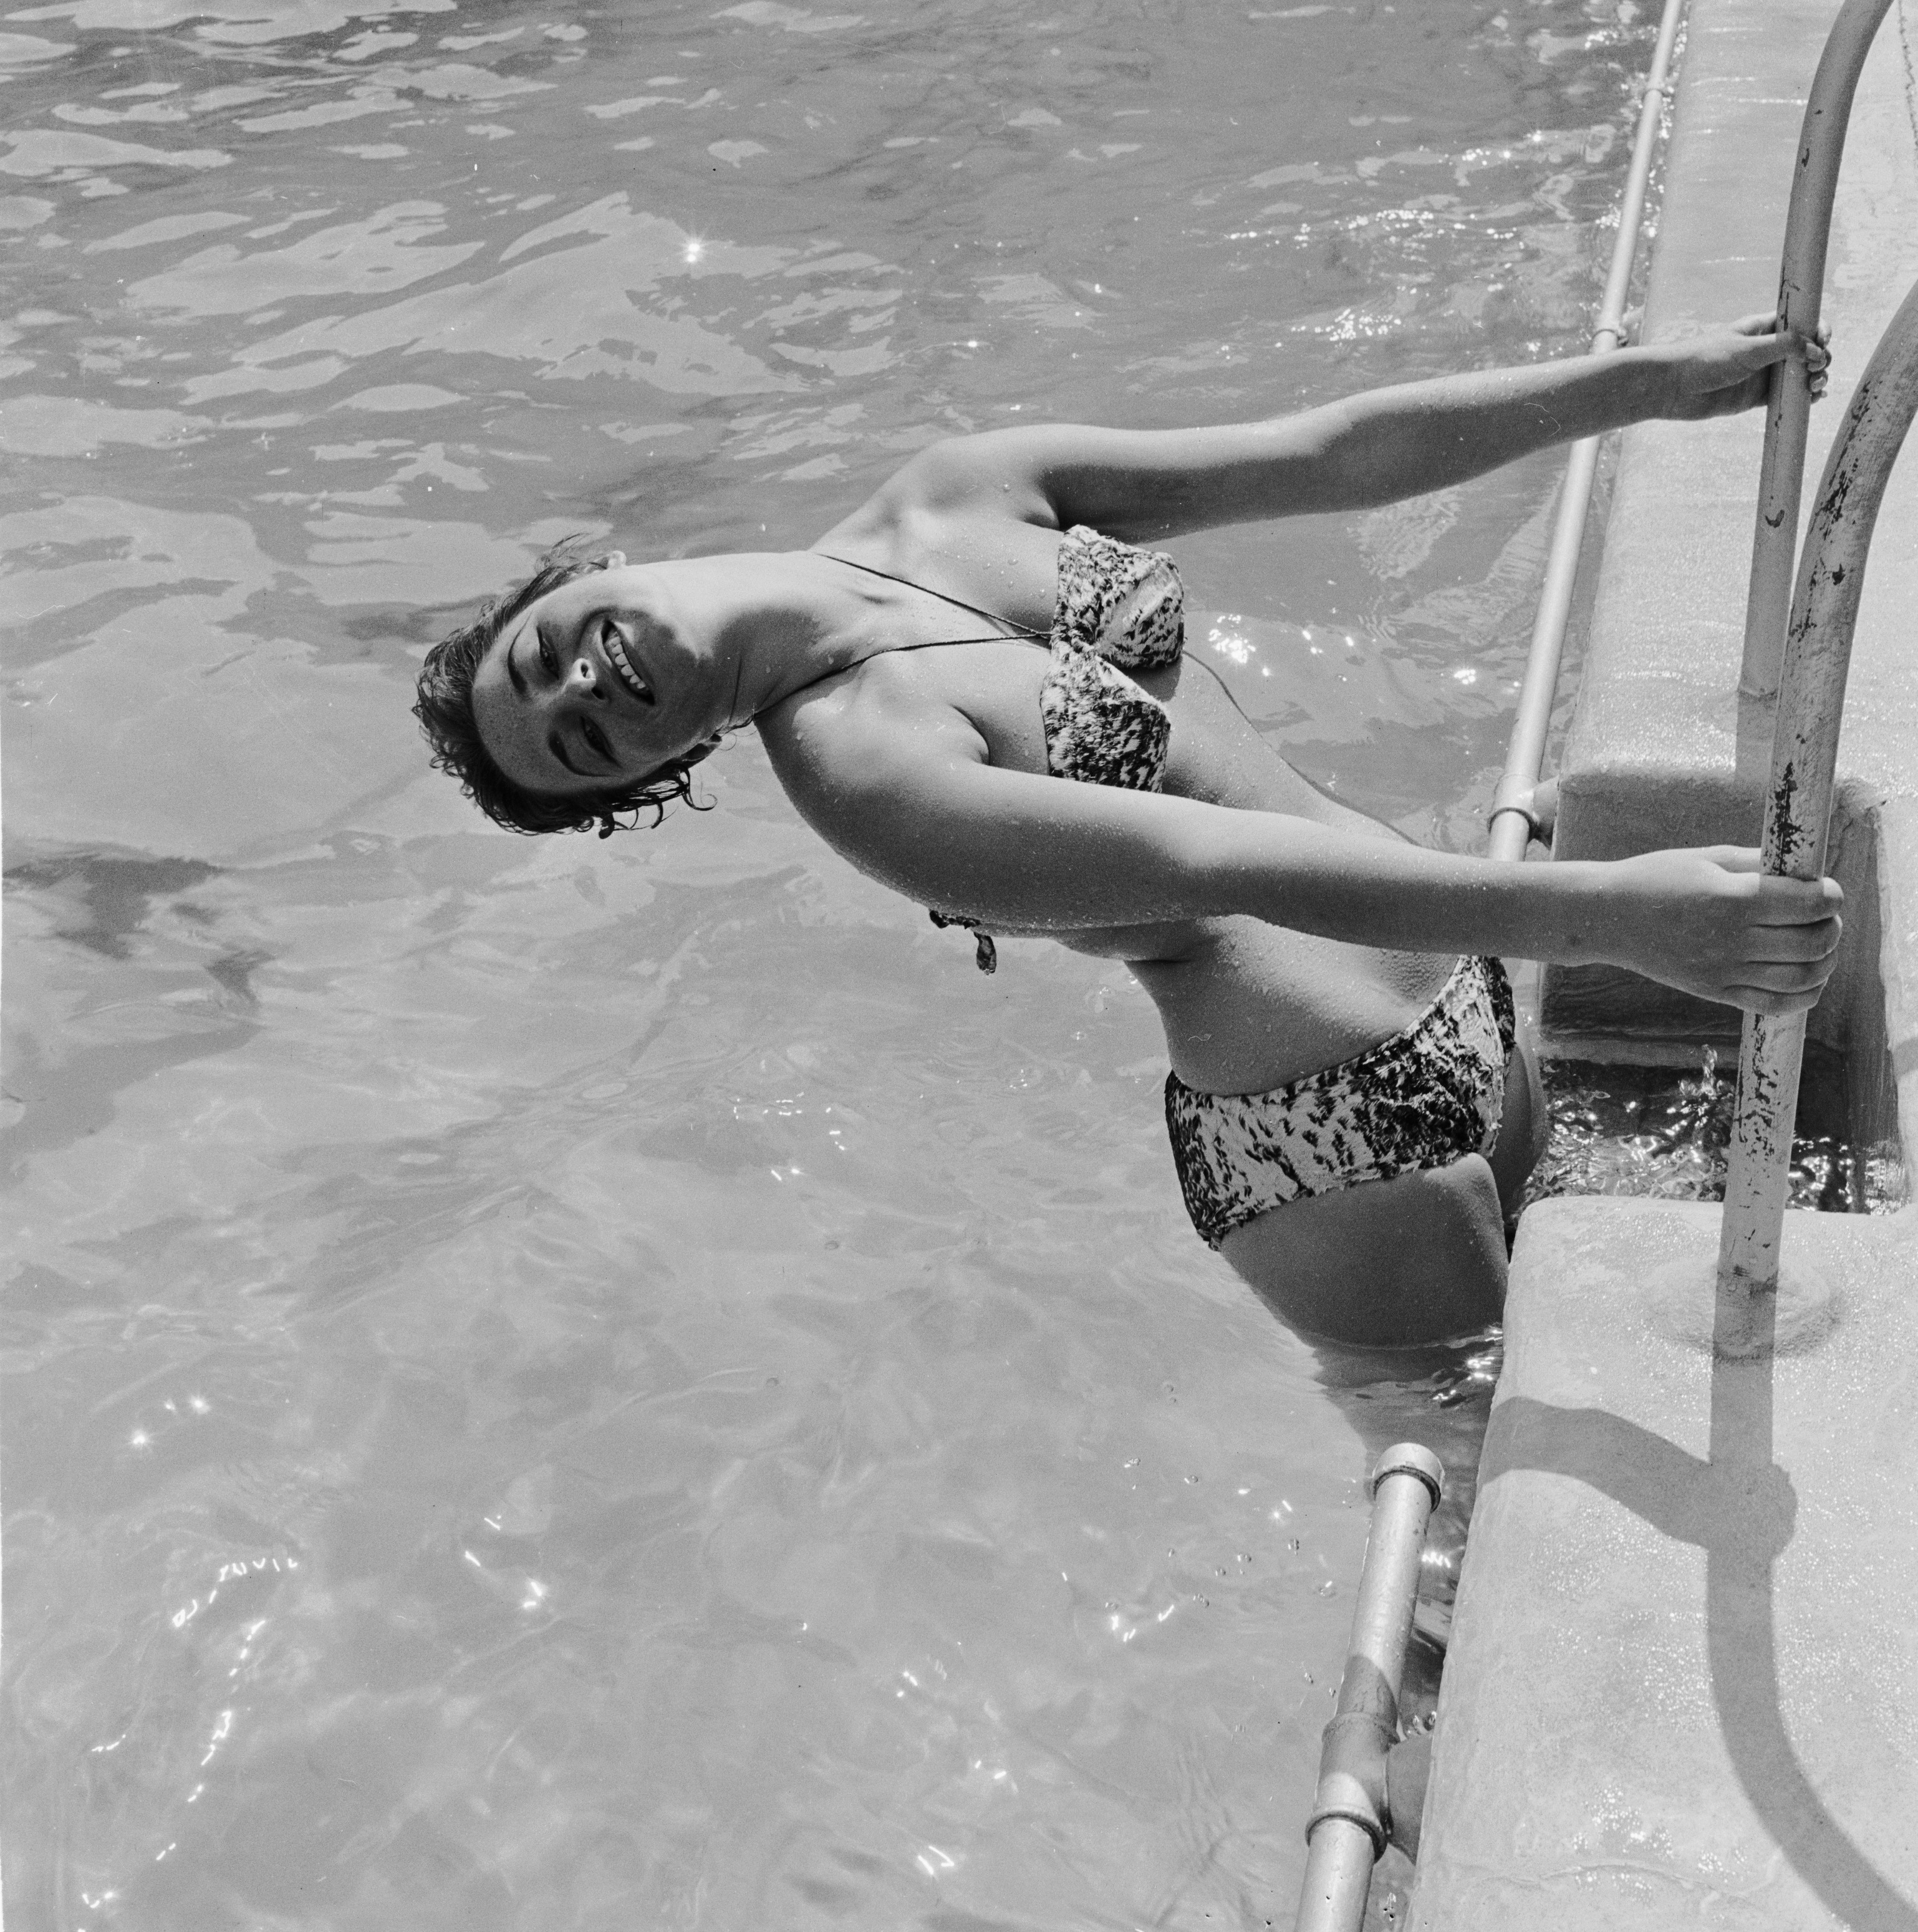 12th August 1955:  17-year-old starlet Jackie Collins, the younger sister of Joan Collins, cools off at the Oasis swimming pool in London's Holborn. She later made a name for herself as a novelist.  (Photo by John Pratt/Keystone Features/Getty Images)